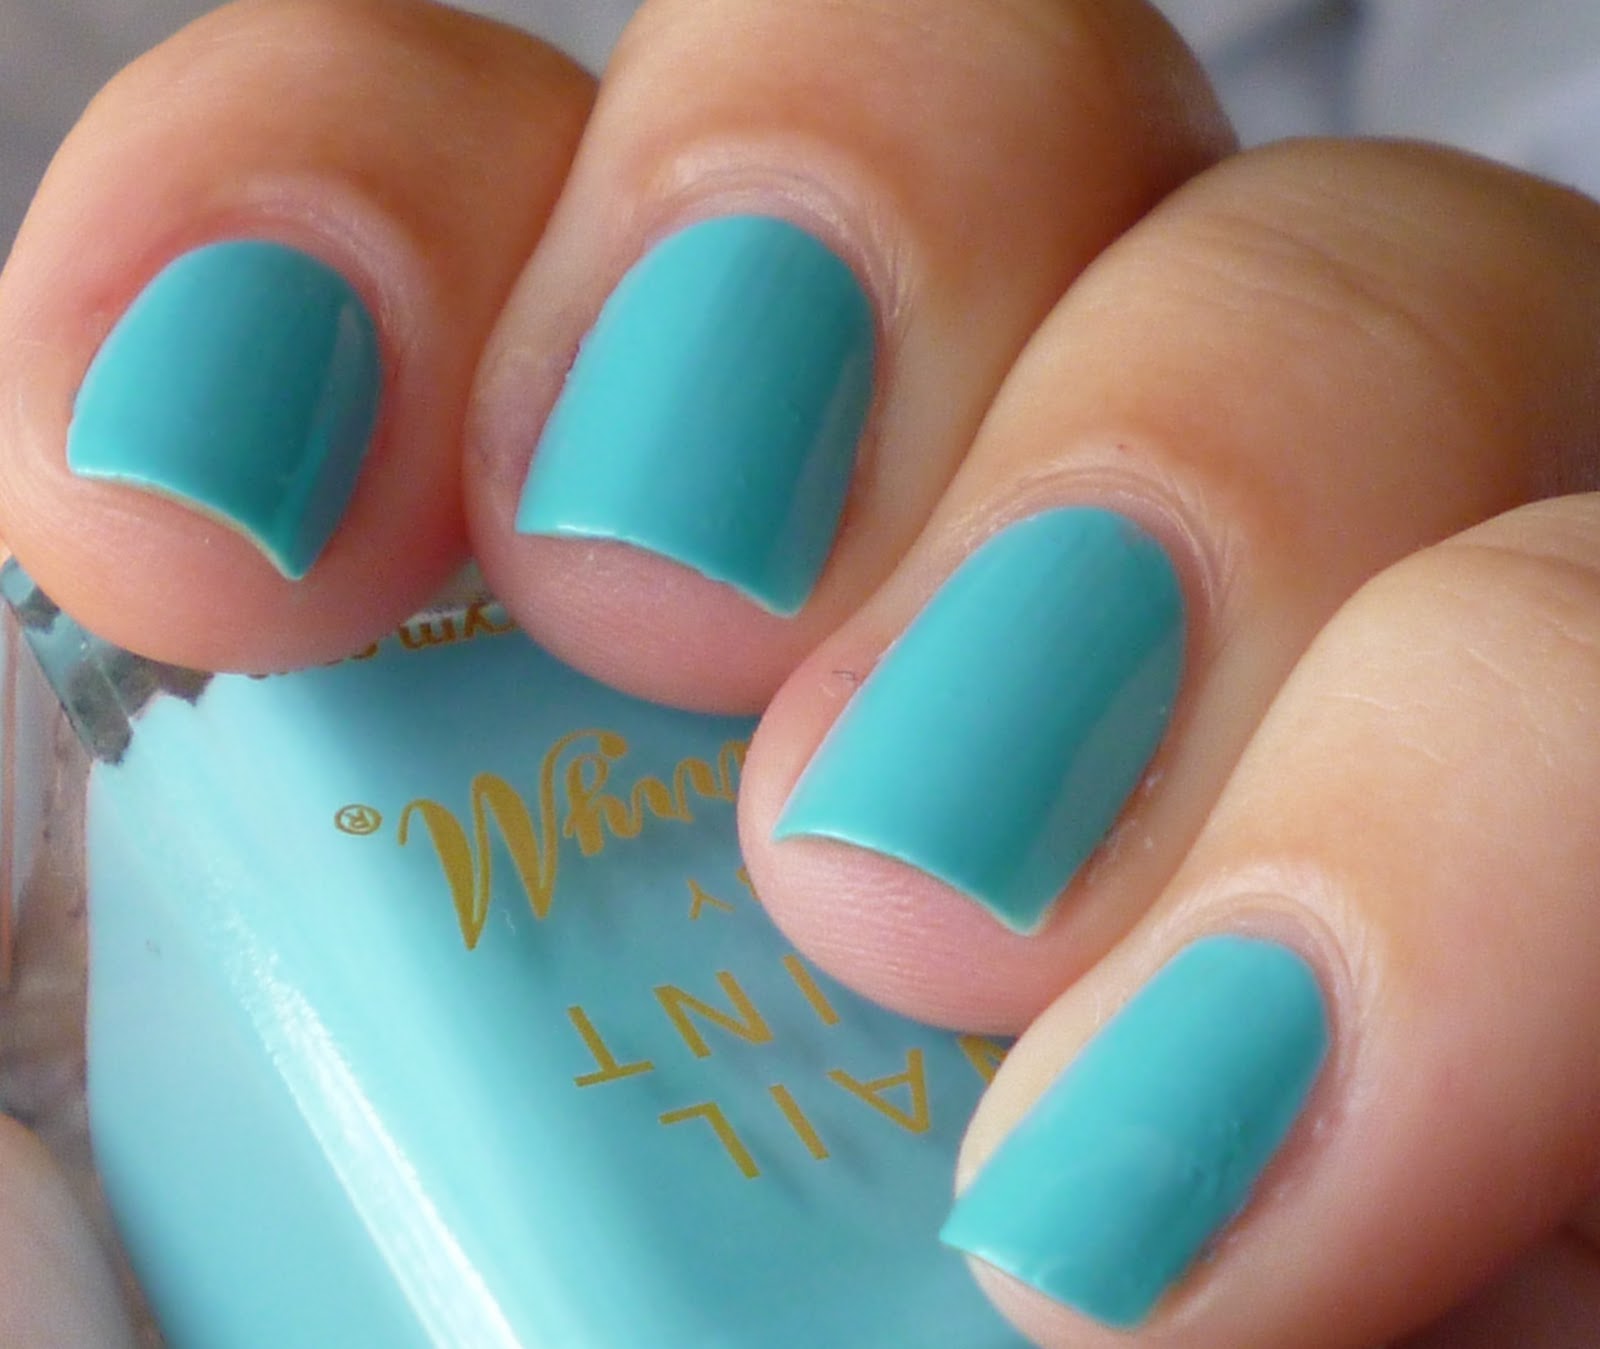 Nail Polish Anon: Barry M Turquoise